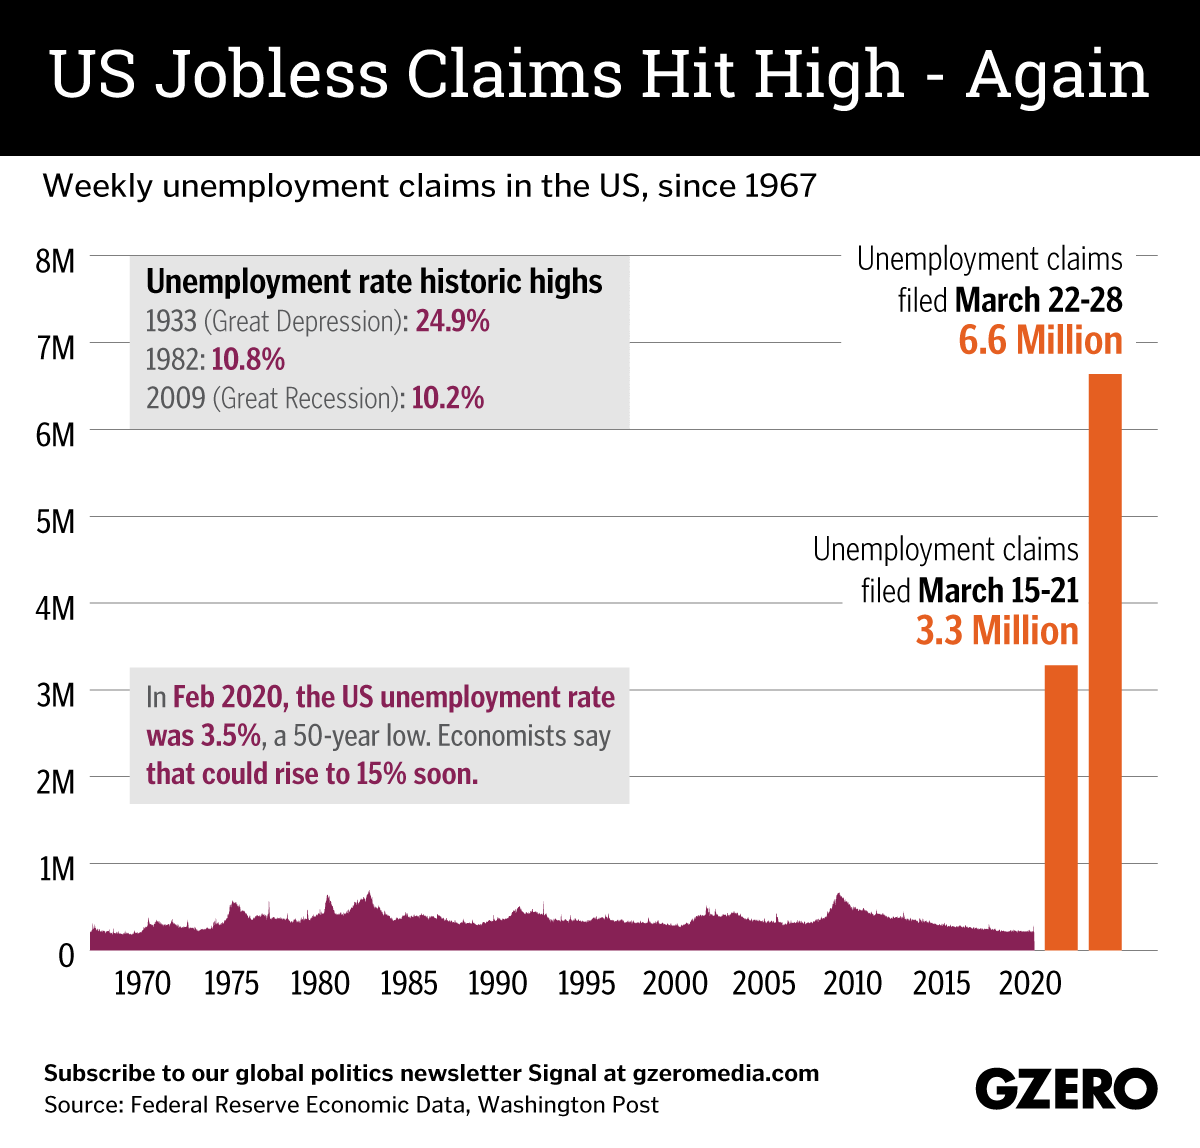 The Graphic Truth: US jobless claims hit high – again